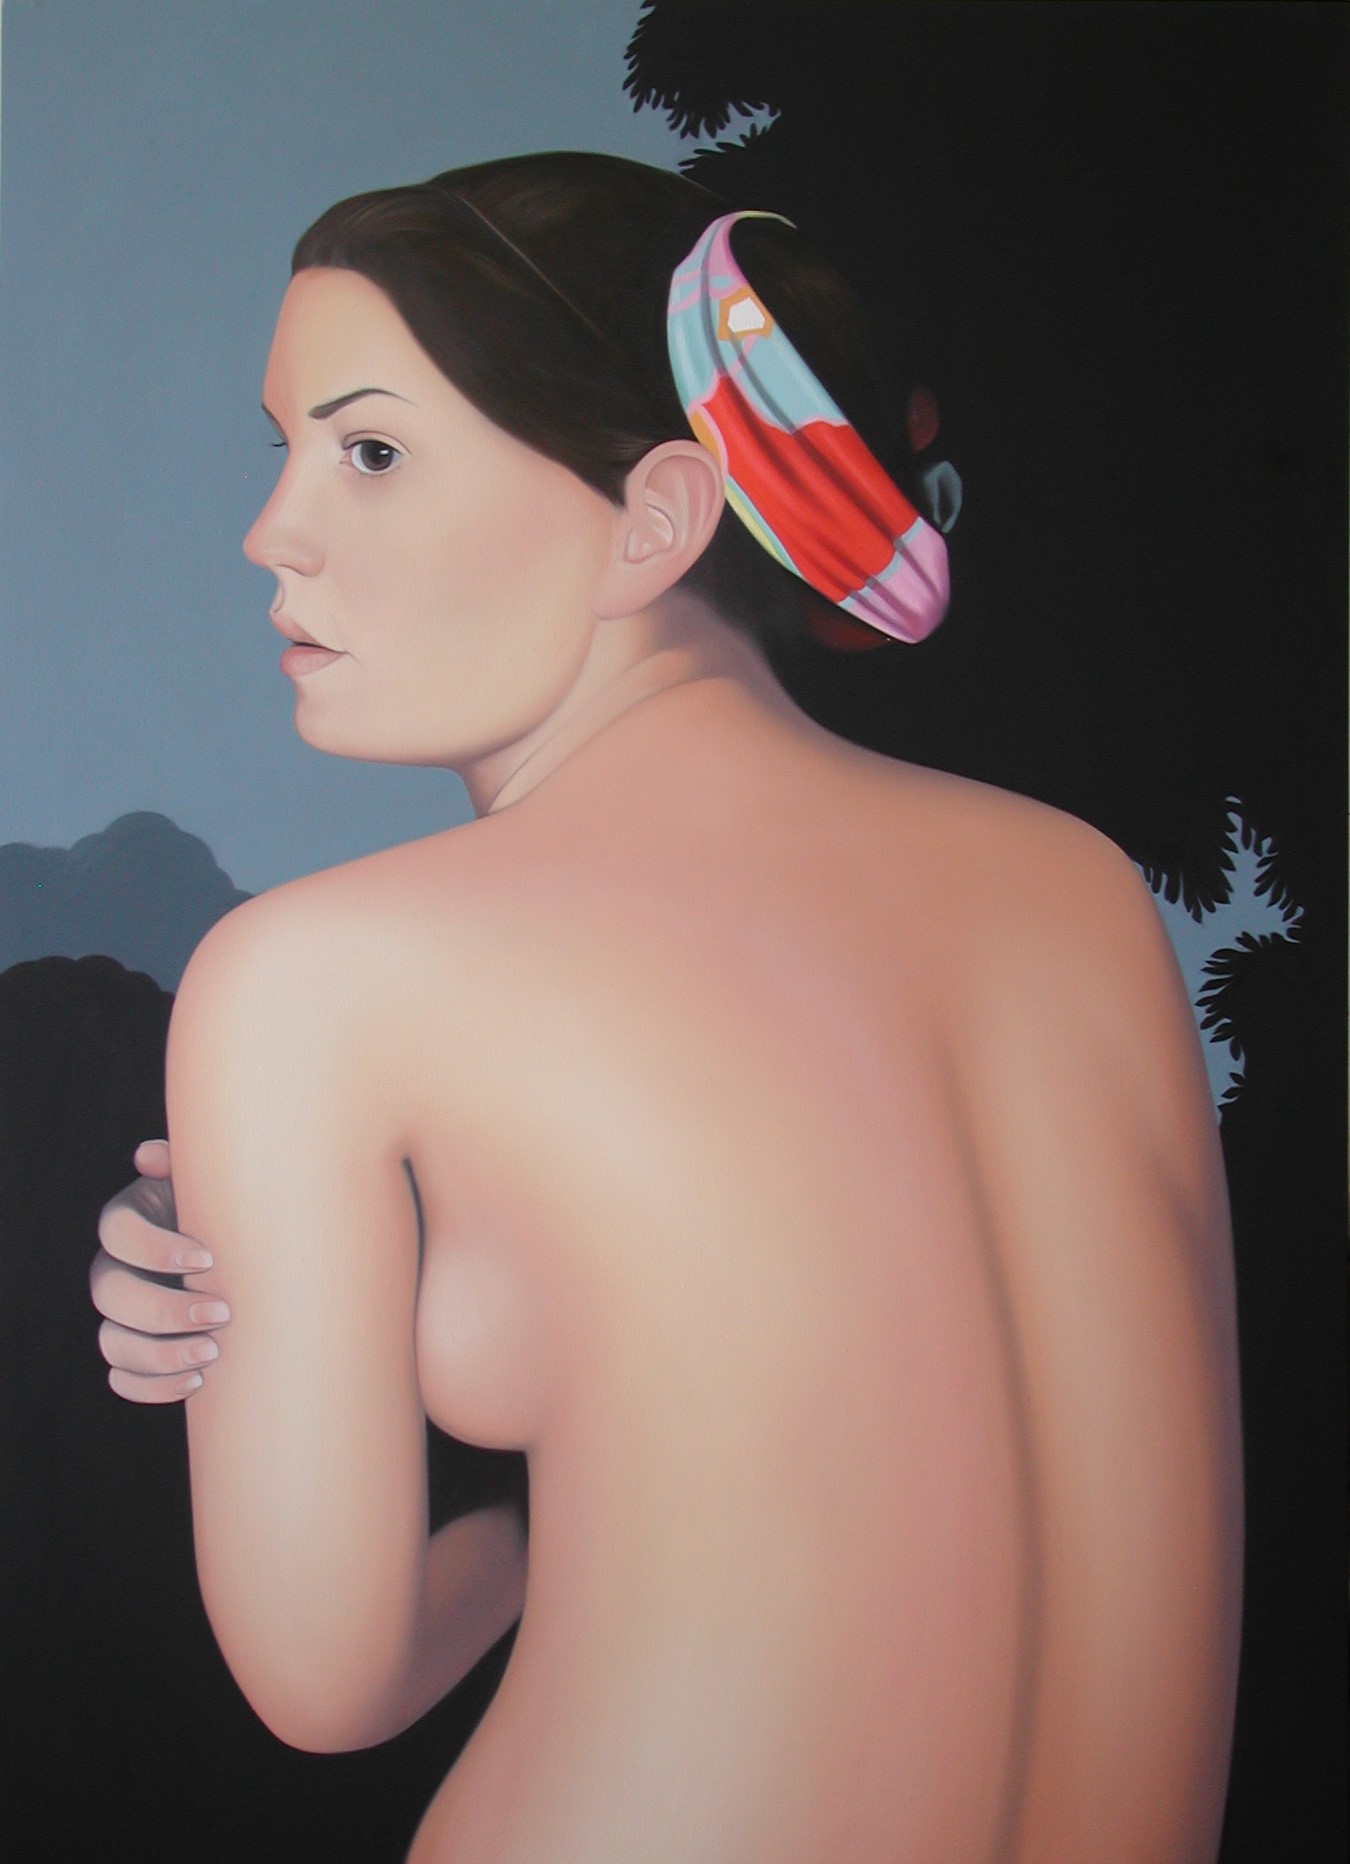 'Female nude' by artist Patricia Rorie